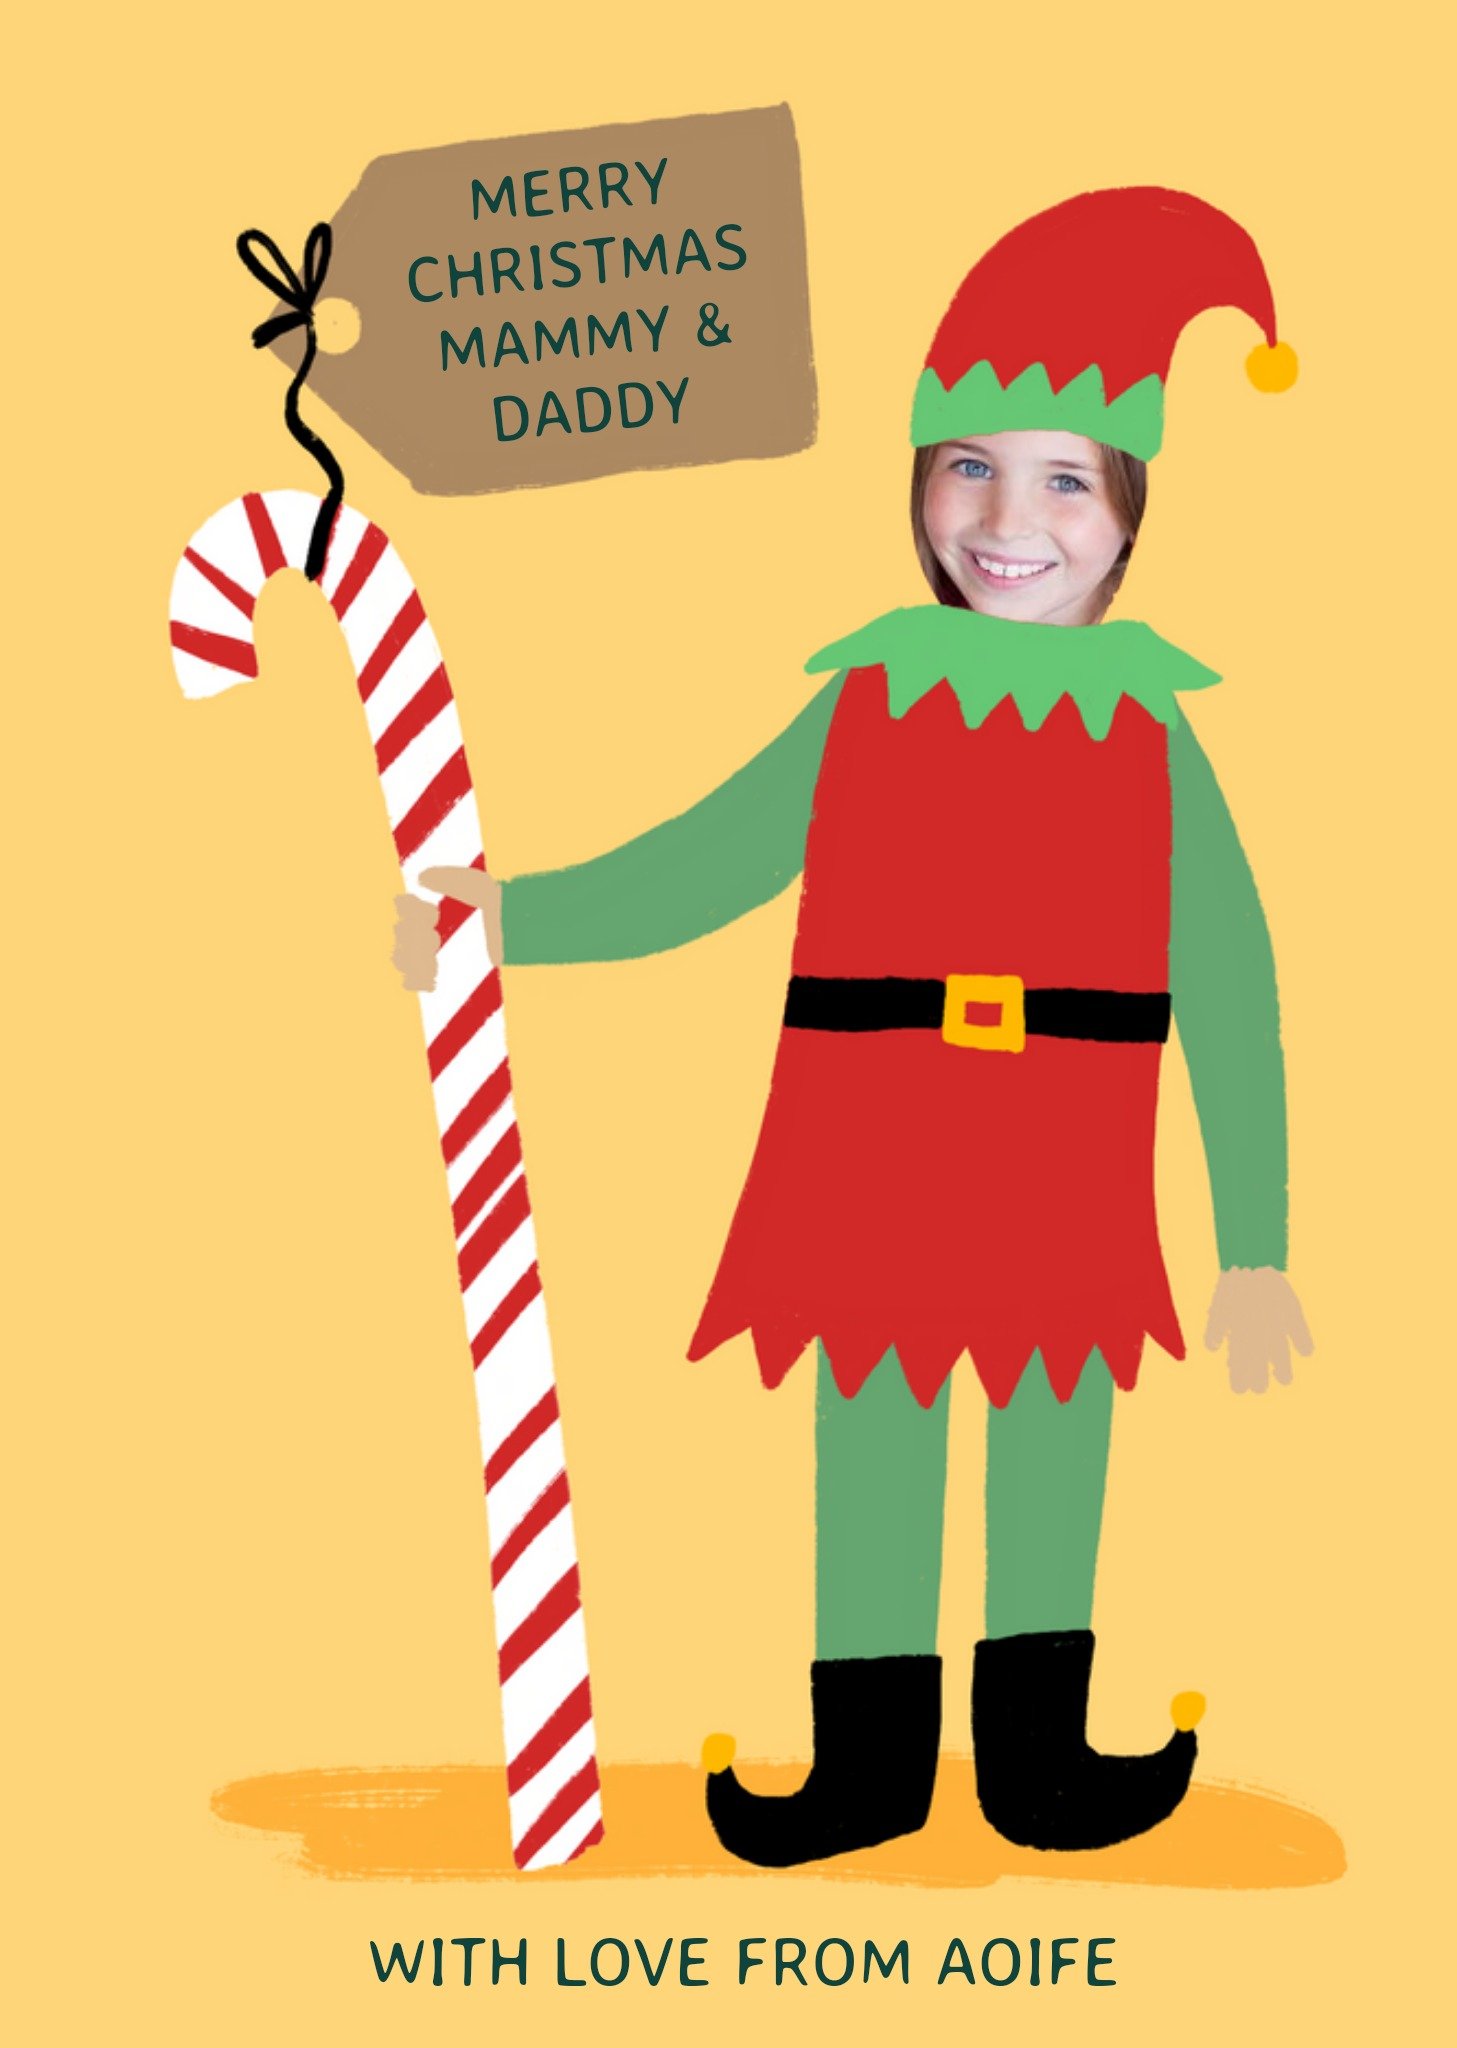 Moonpig Illustration Of A Christmas Elf With A Large Candy Cane Photo Upload Christmas Card Ecard